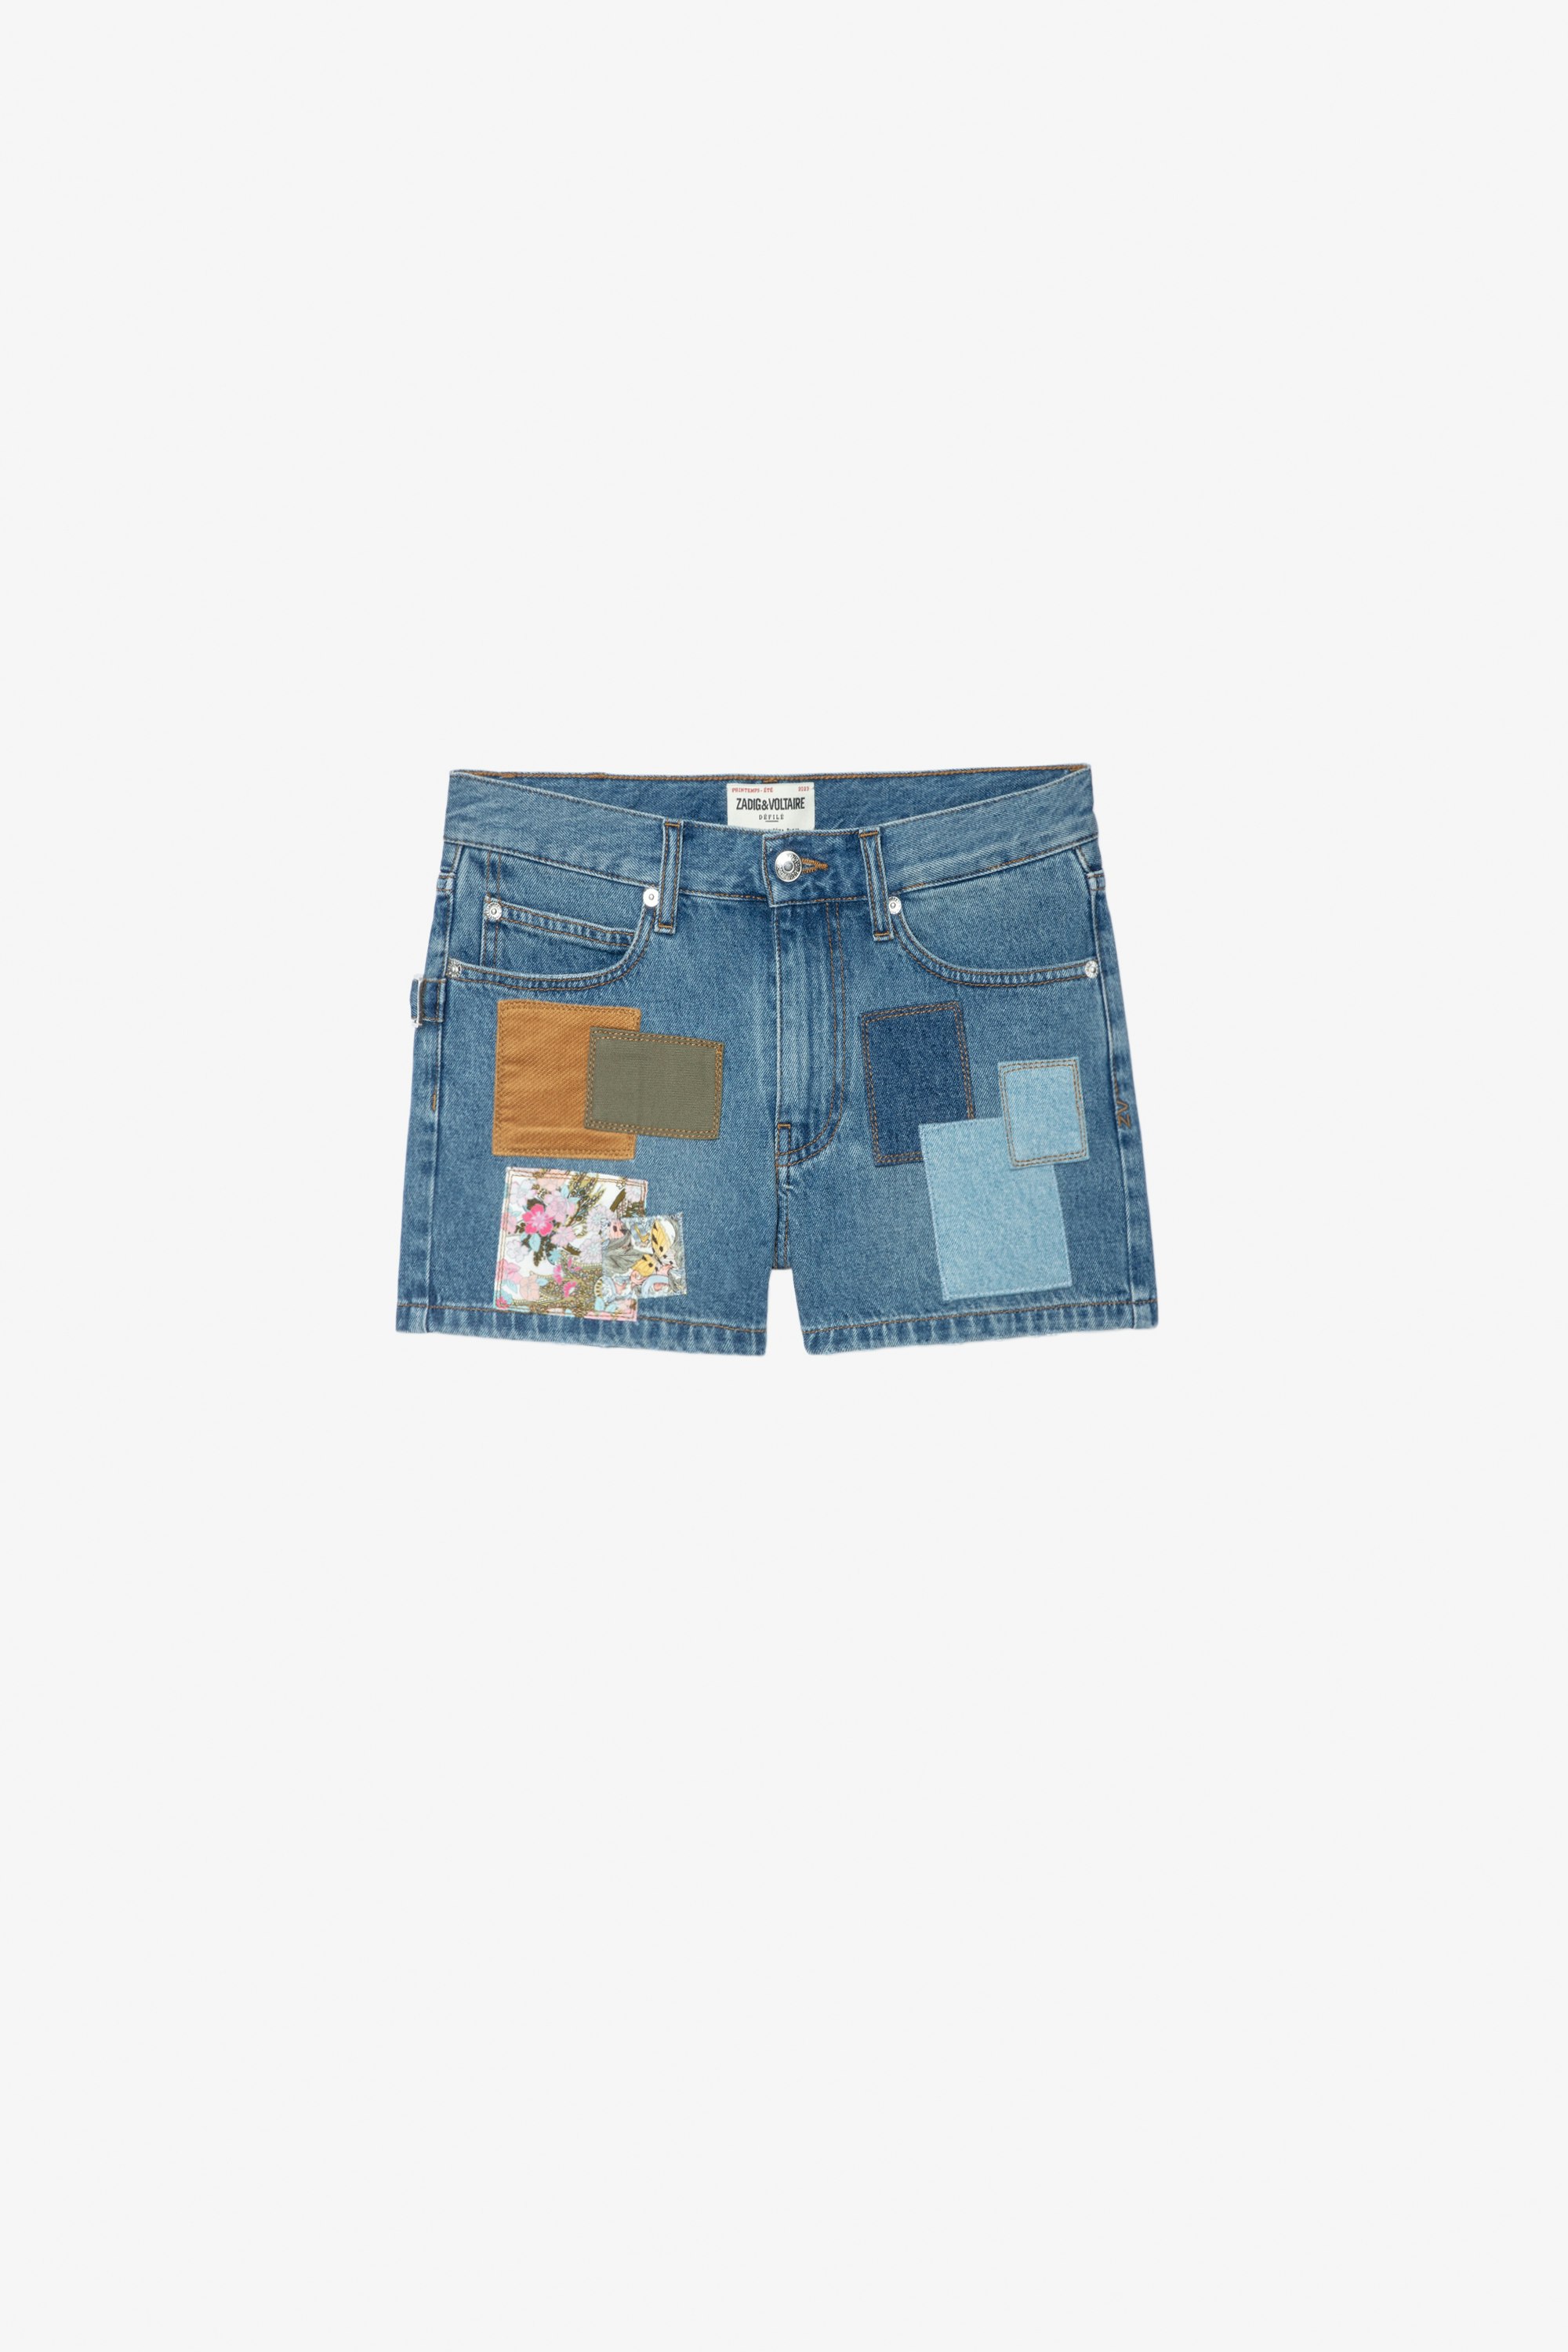 Sina Shorts Women’s sky-blue denim shorts with single-colour patches and prints